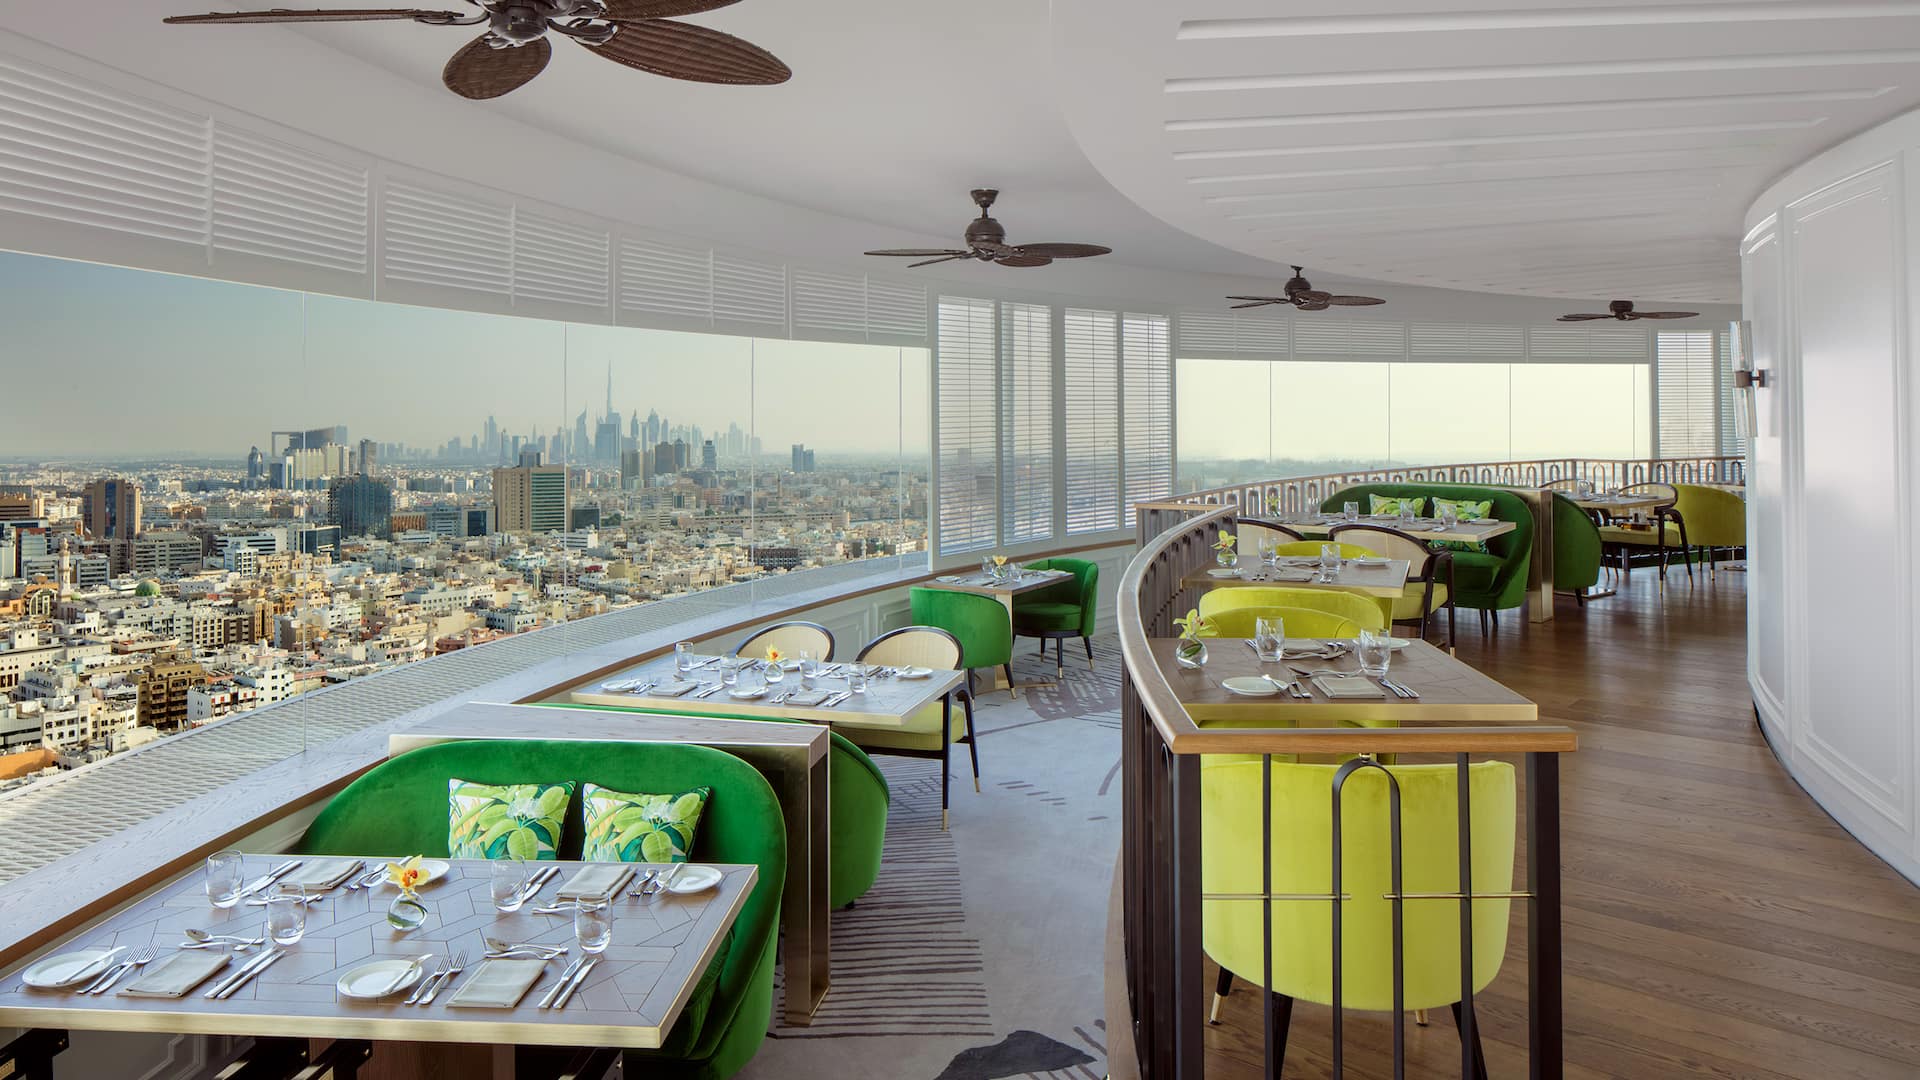 Dining tables and chairs in revolving hotel restaurant